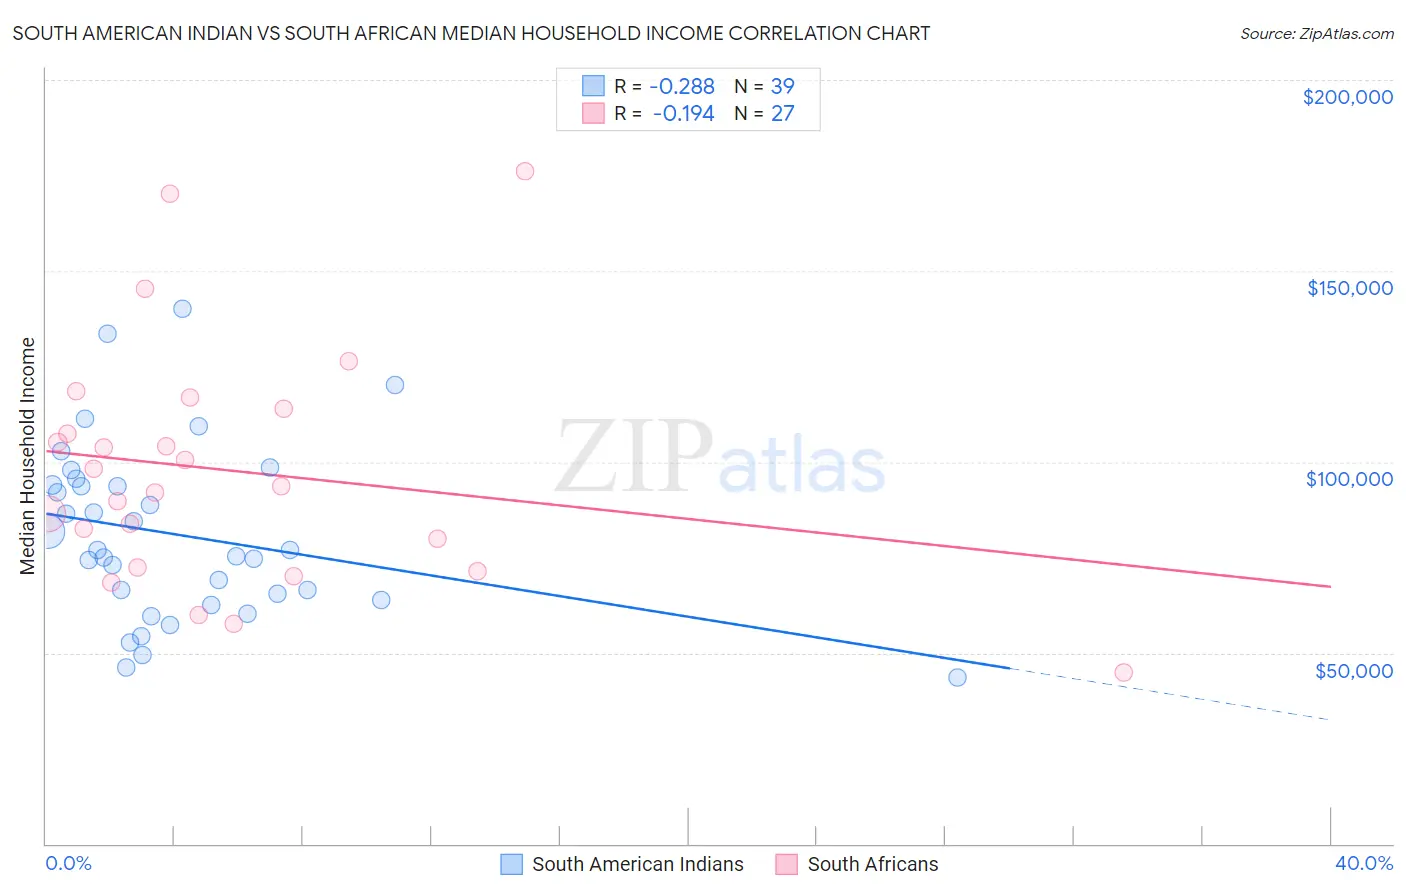 South American Indian vs South African Median Household Income